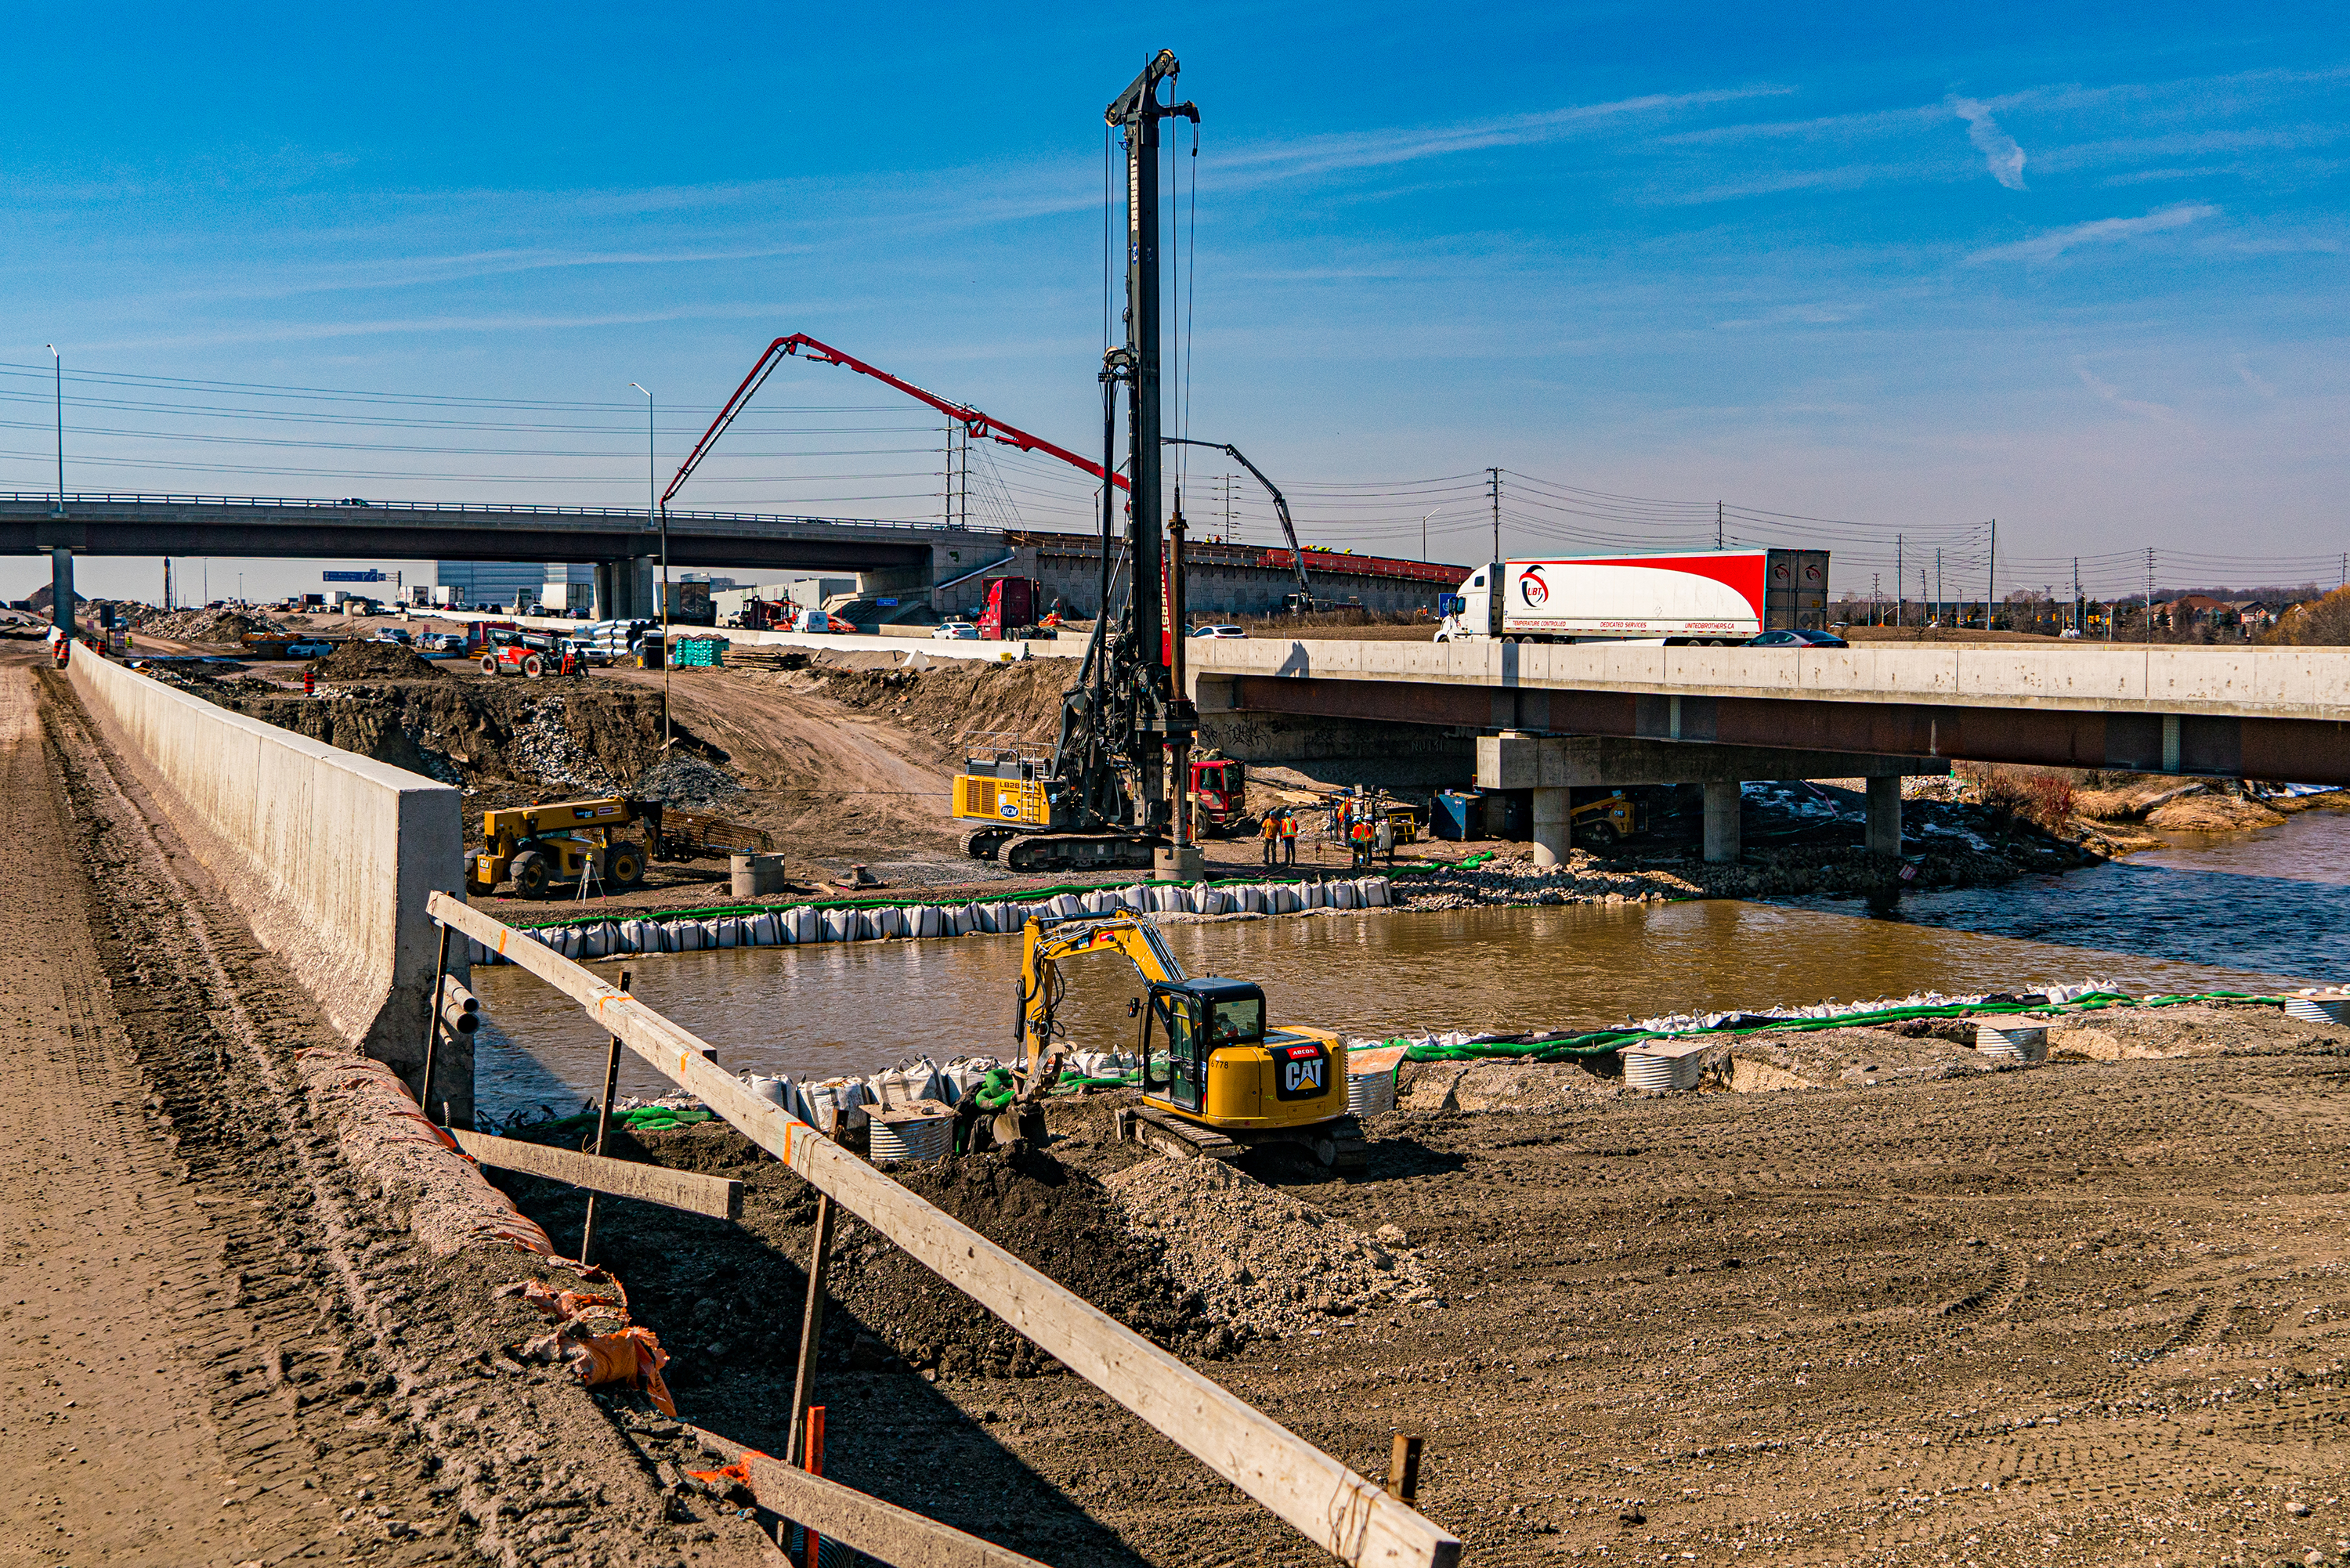 Caisson Installation Underway at Credit River